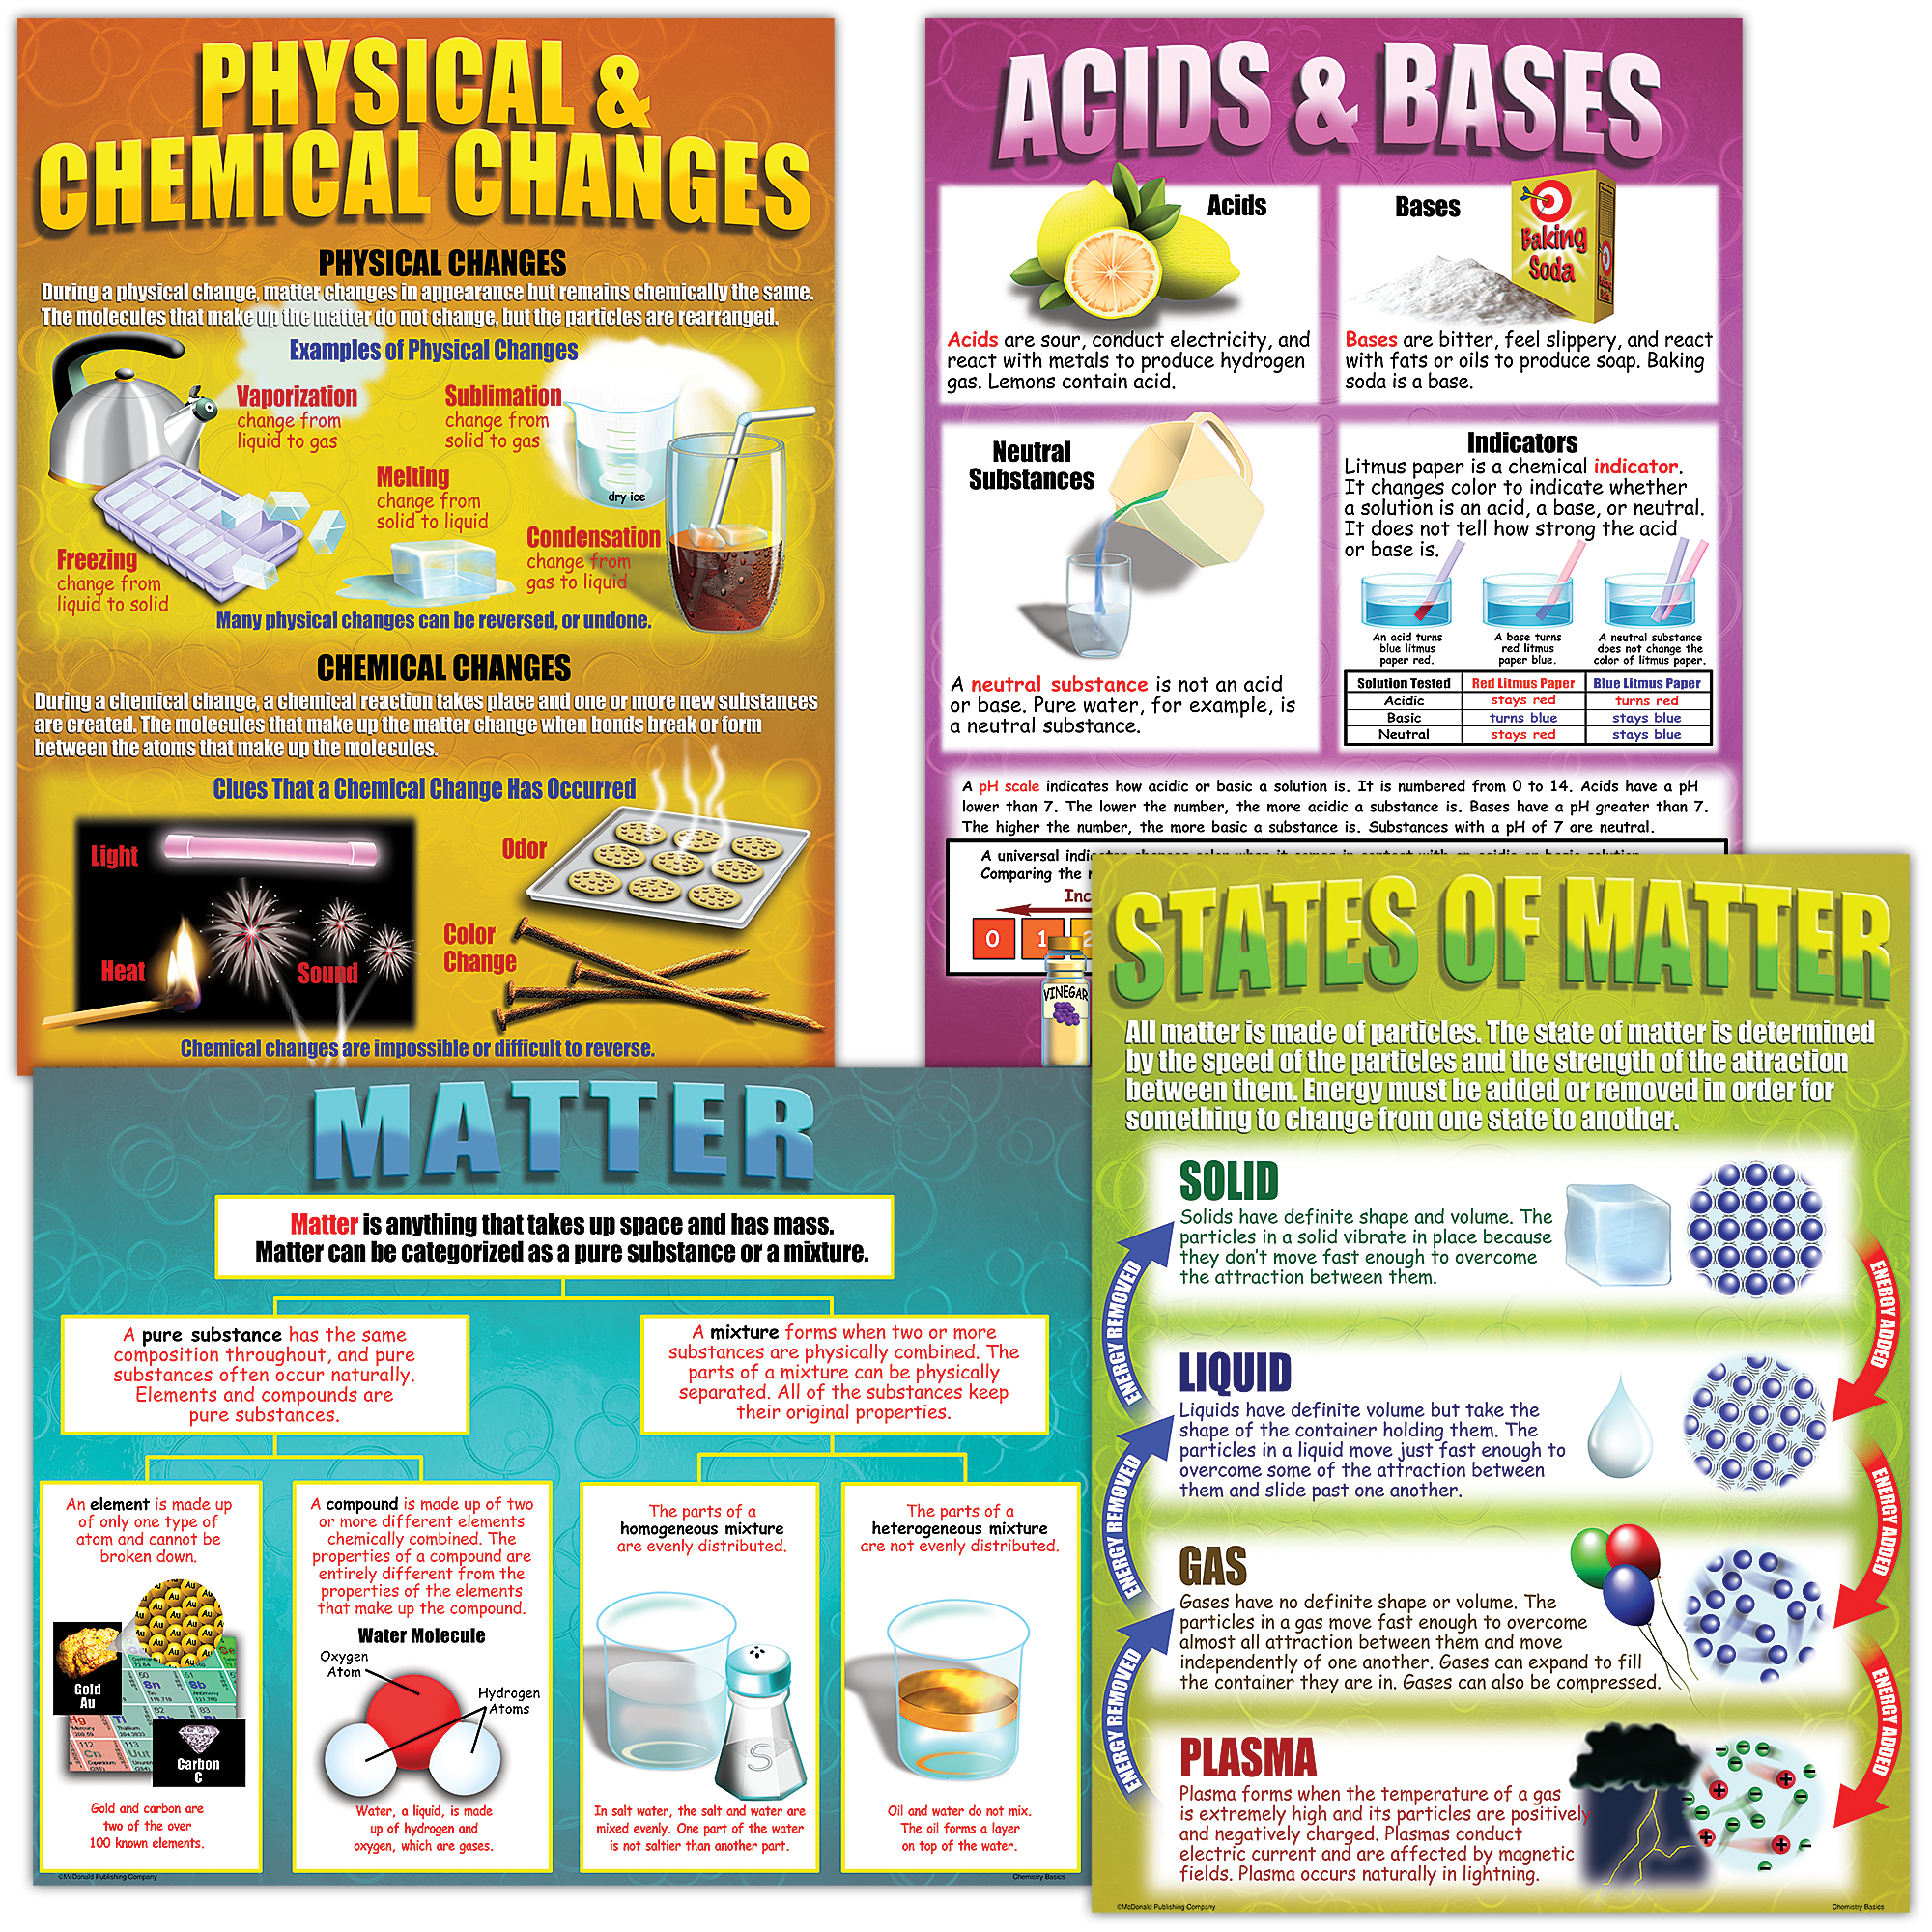 These posters teach the difference between physical and chemical changes, key information about acids and bases, the states of matter, and the characteristics of elements, compounds, and mixtures.